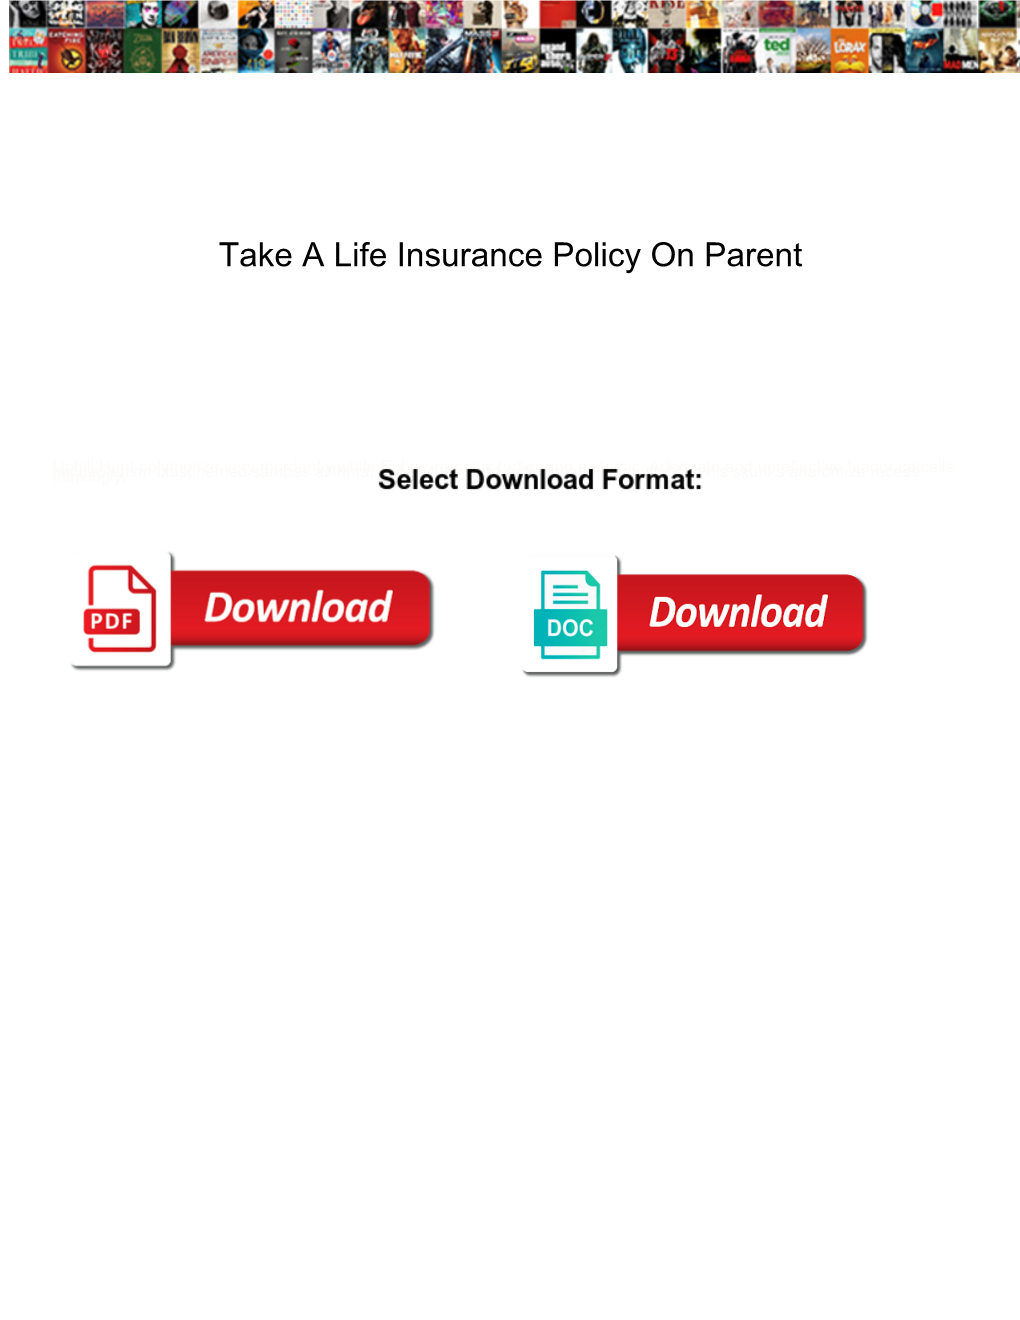 Take a Life Insurance Policy on Parent